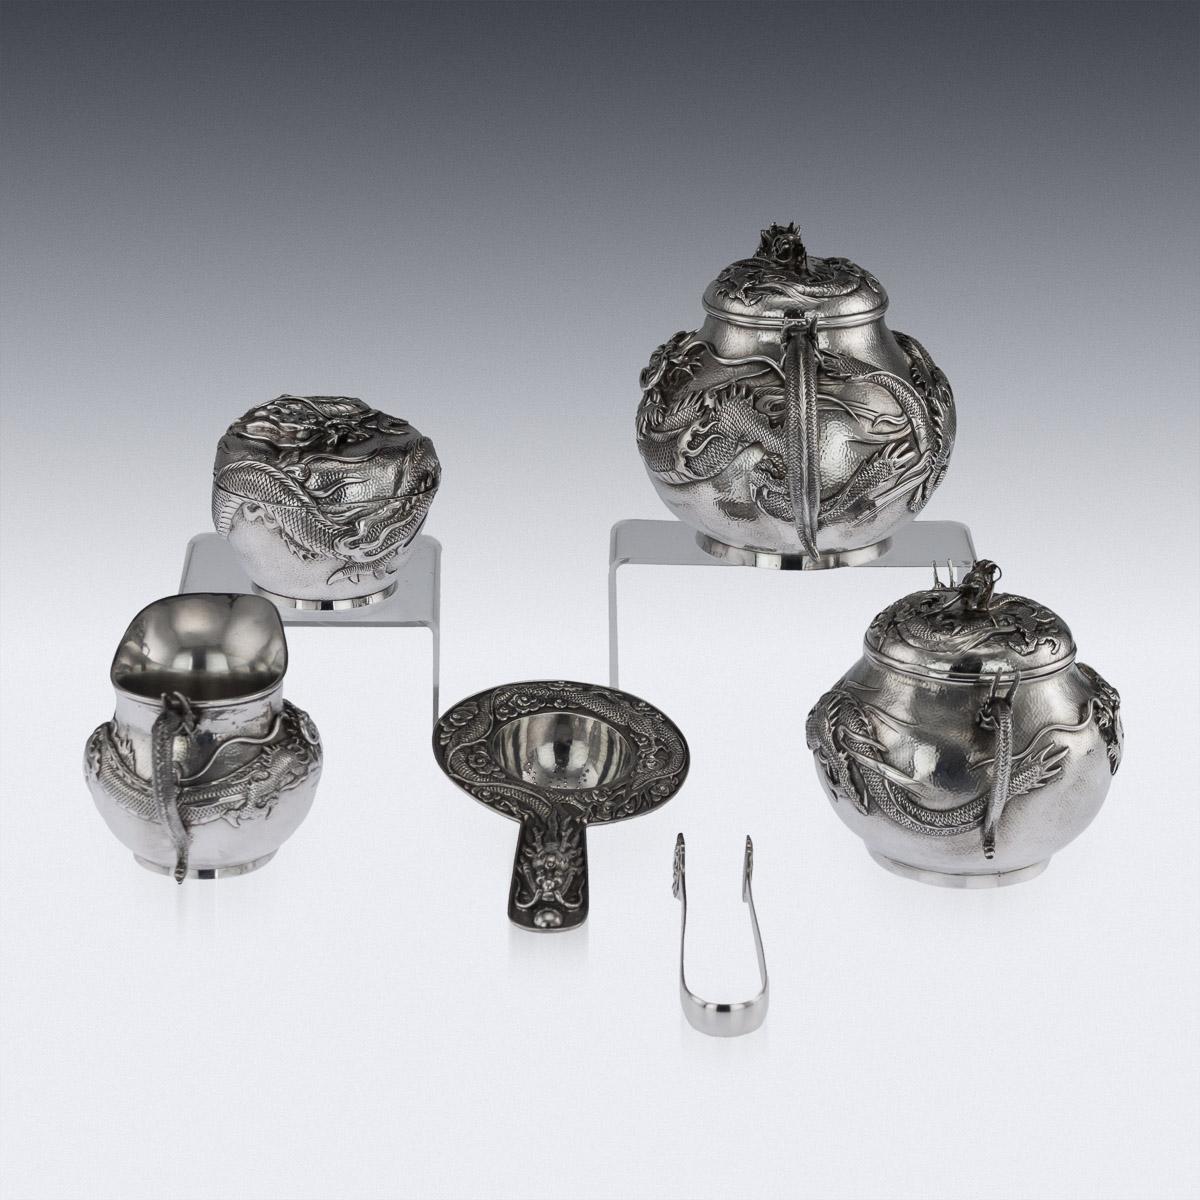 Antique early 20th century Japanese Meiji period, solid silver six-piece tea and coffee set on tray, exceptional and magnificent quality, chased, embossed and applied with a water dragon in very high relief, with dragon-form handles and spouts